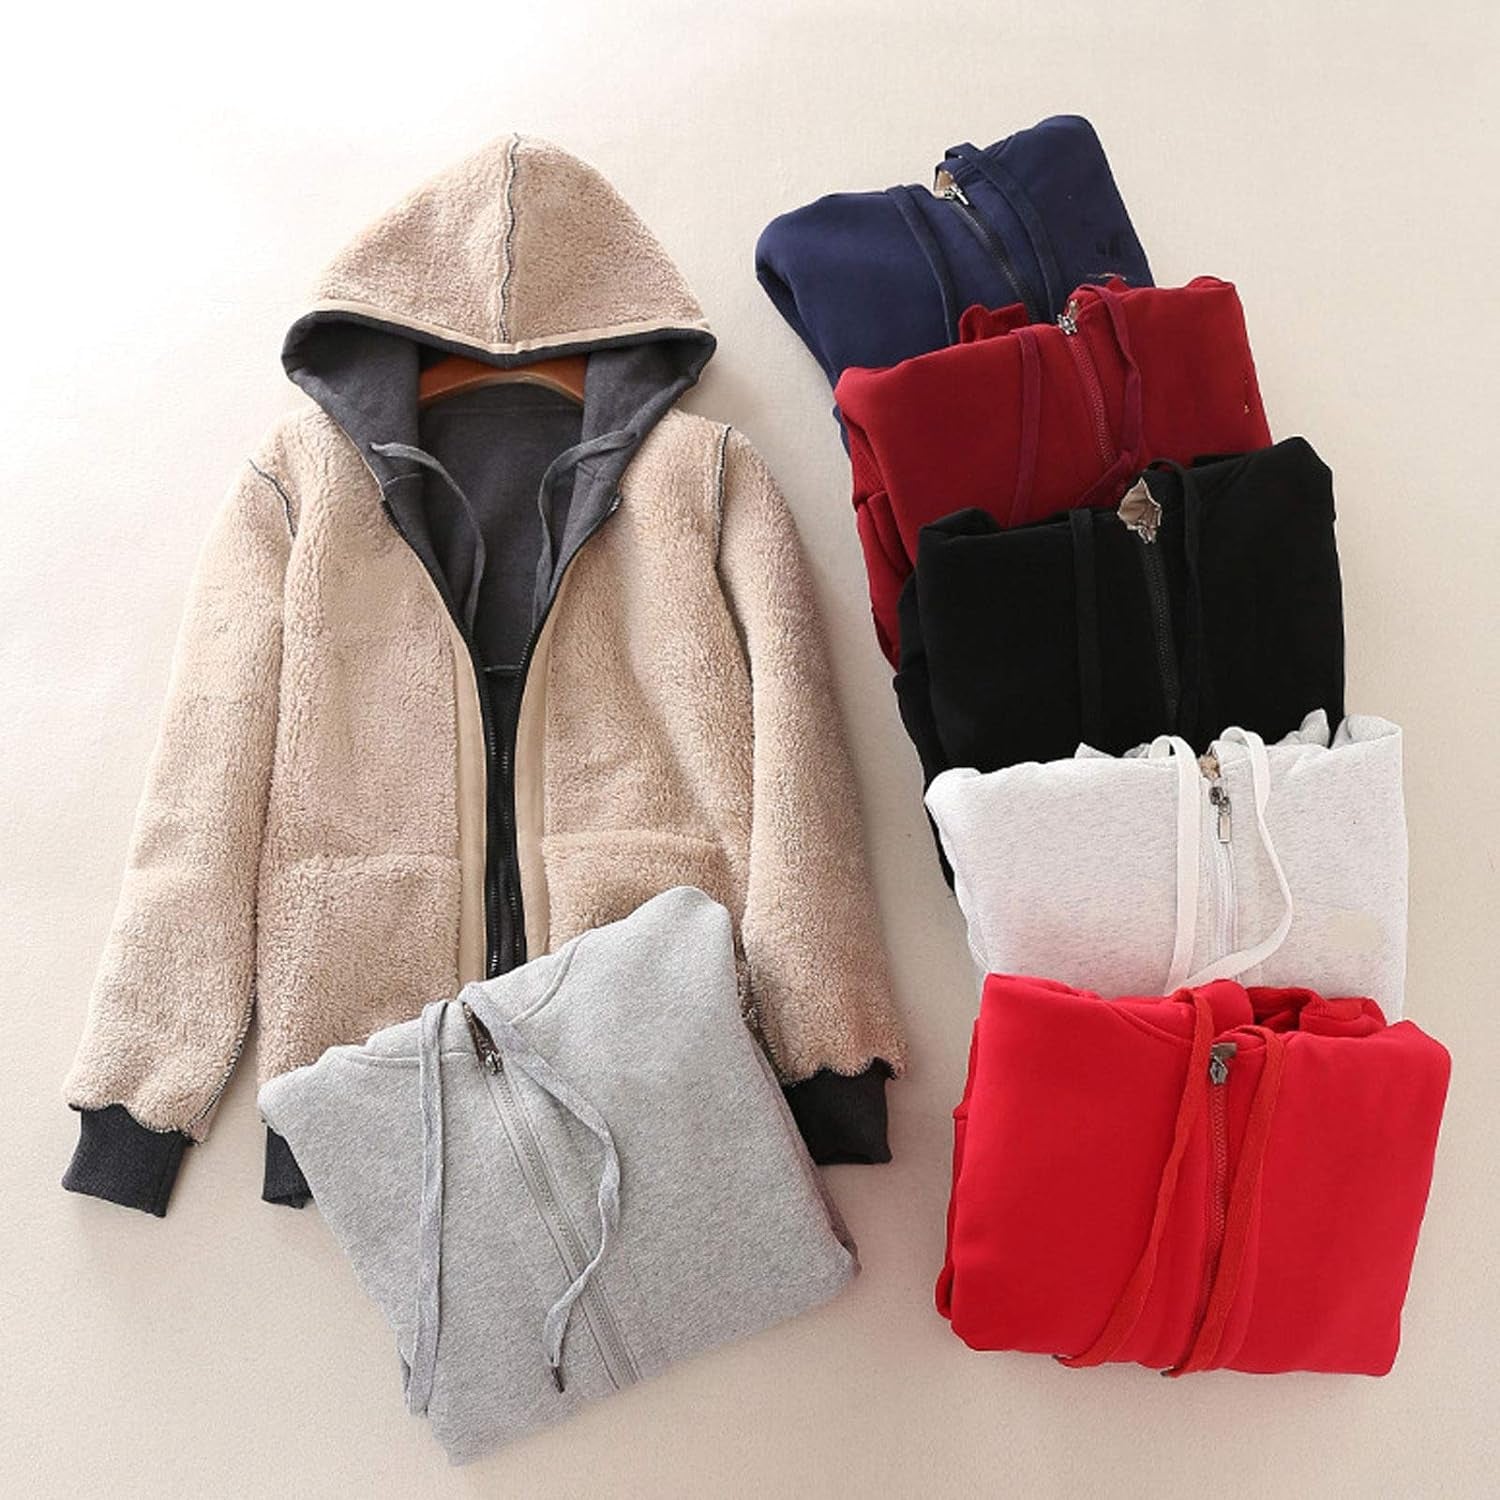 "Cozy up in Style: Women'S Full Zip Sherpa-Lined Hoodie - the Perfect Winter Jacket with Pockets"